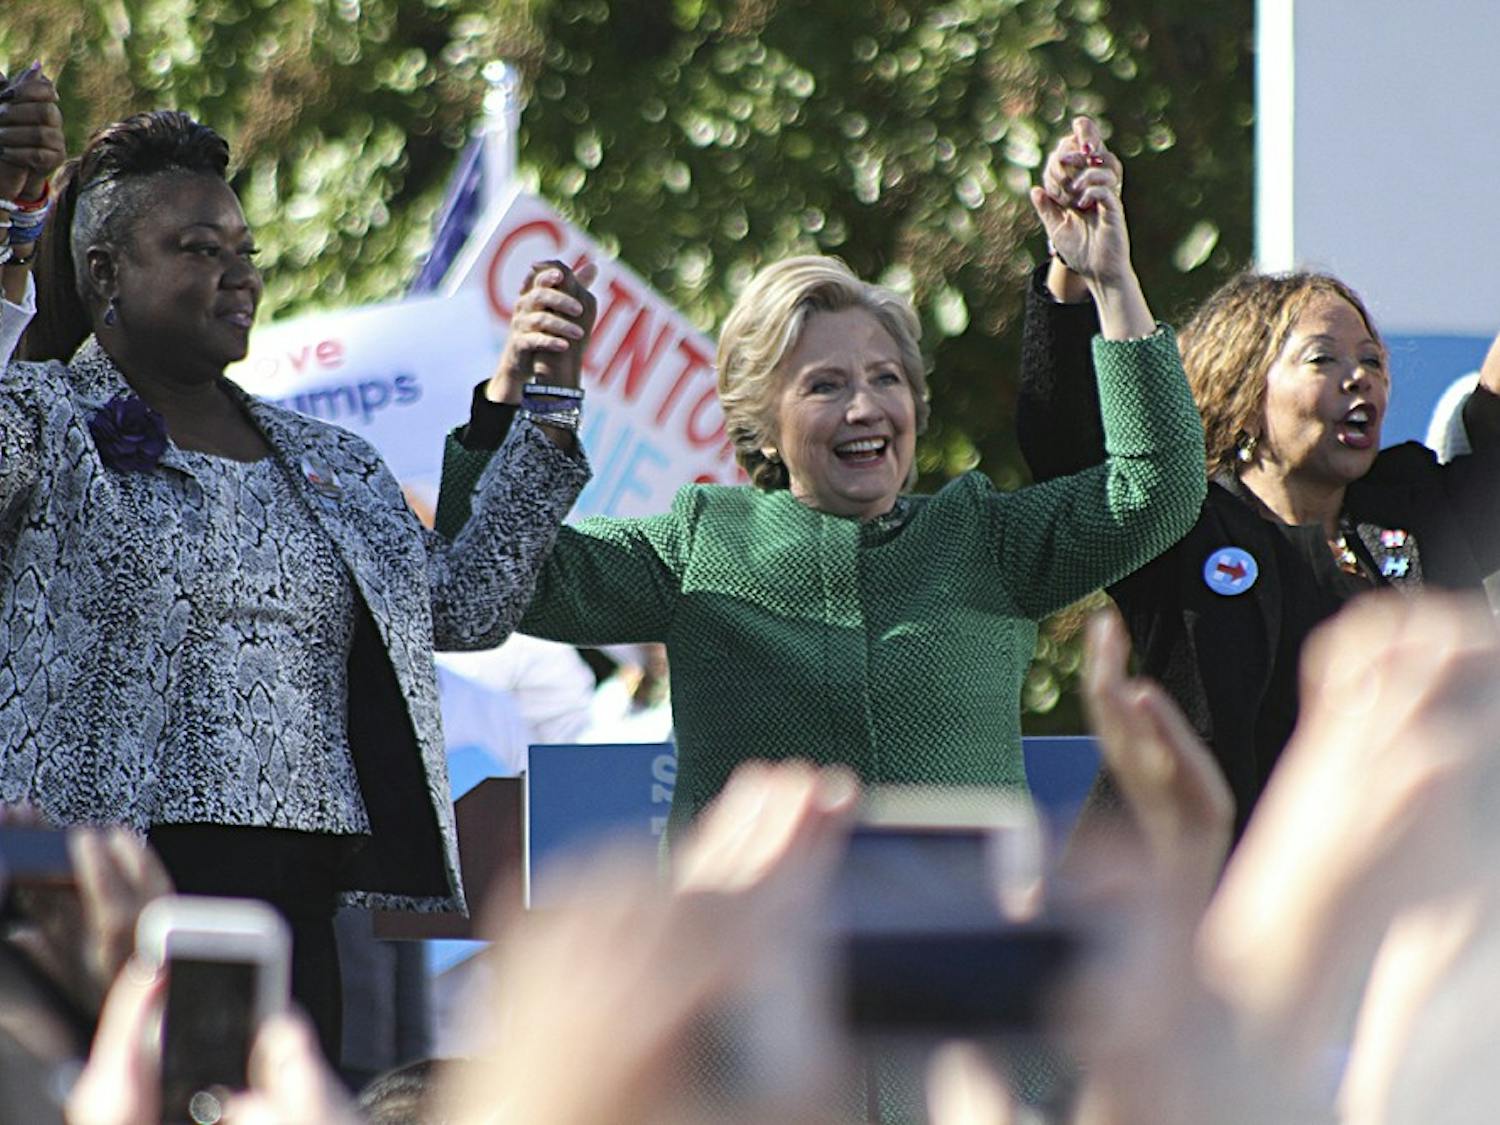 Democratic presidential nominee Hillary Clinton (center) holds hands with Mothers of the Movement members Sybrina Fulton (left), the mother of Trayvon Martin, and Lucy McBath (left), the mother of Jordan Davis. Mothers of the Movement is a group working to end police brutality.